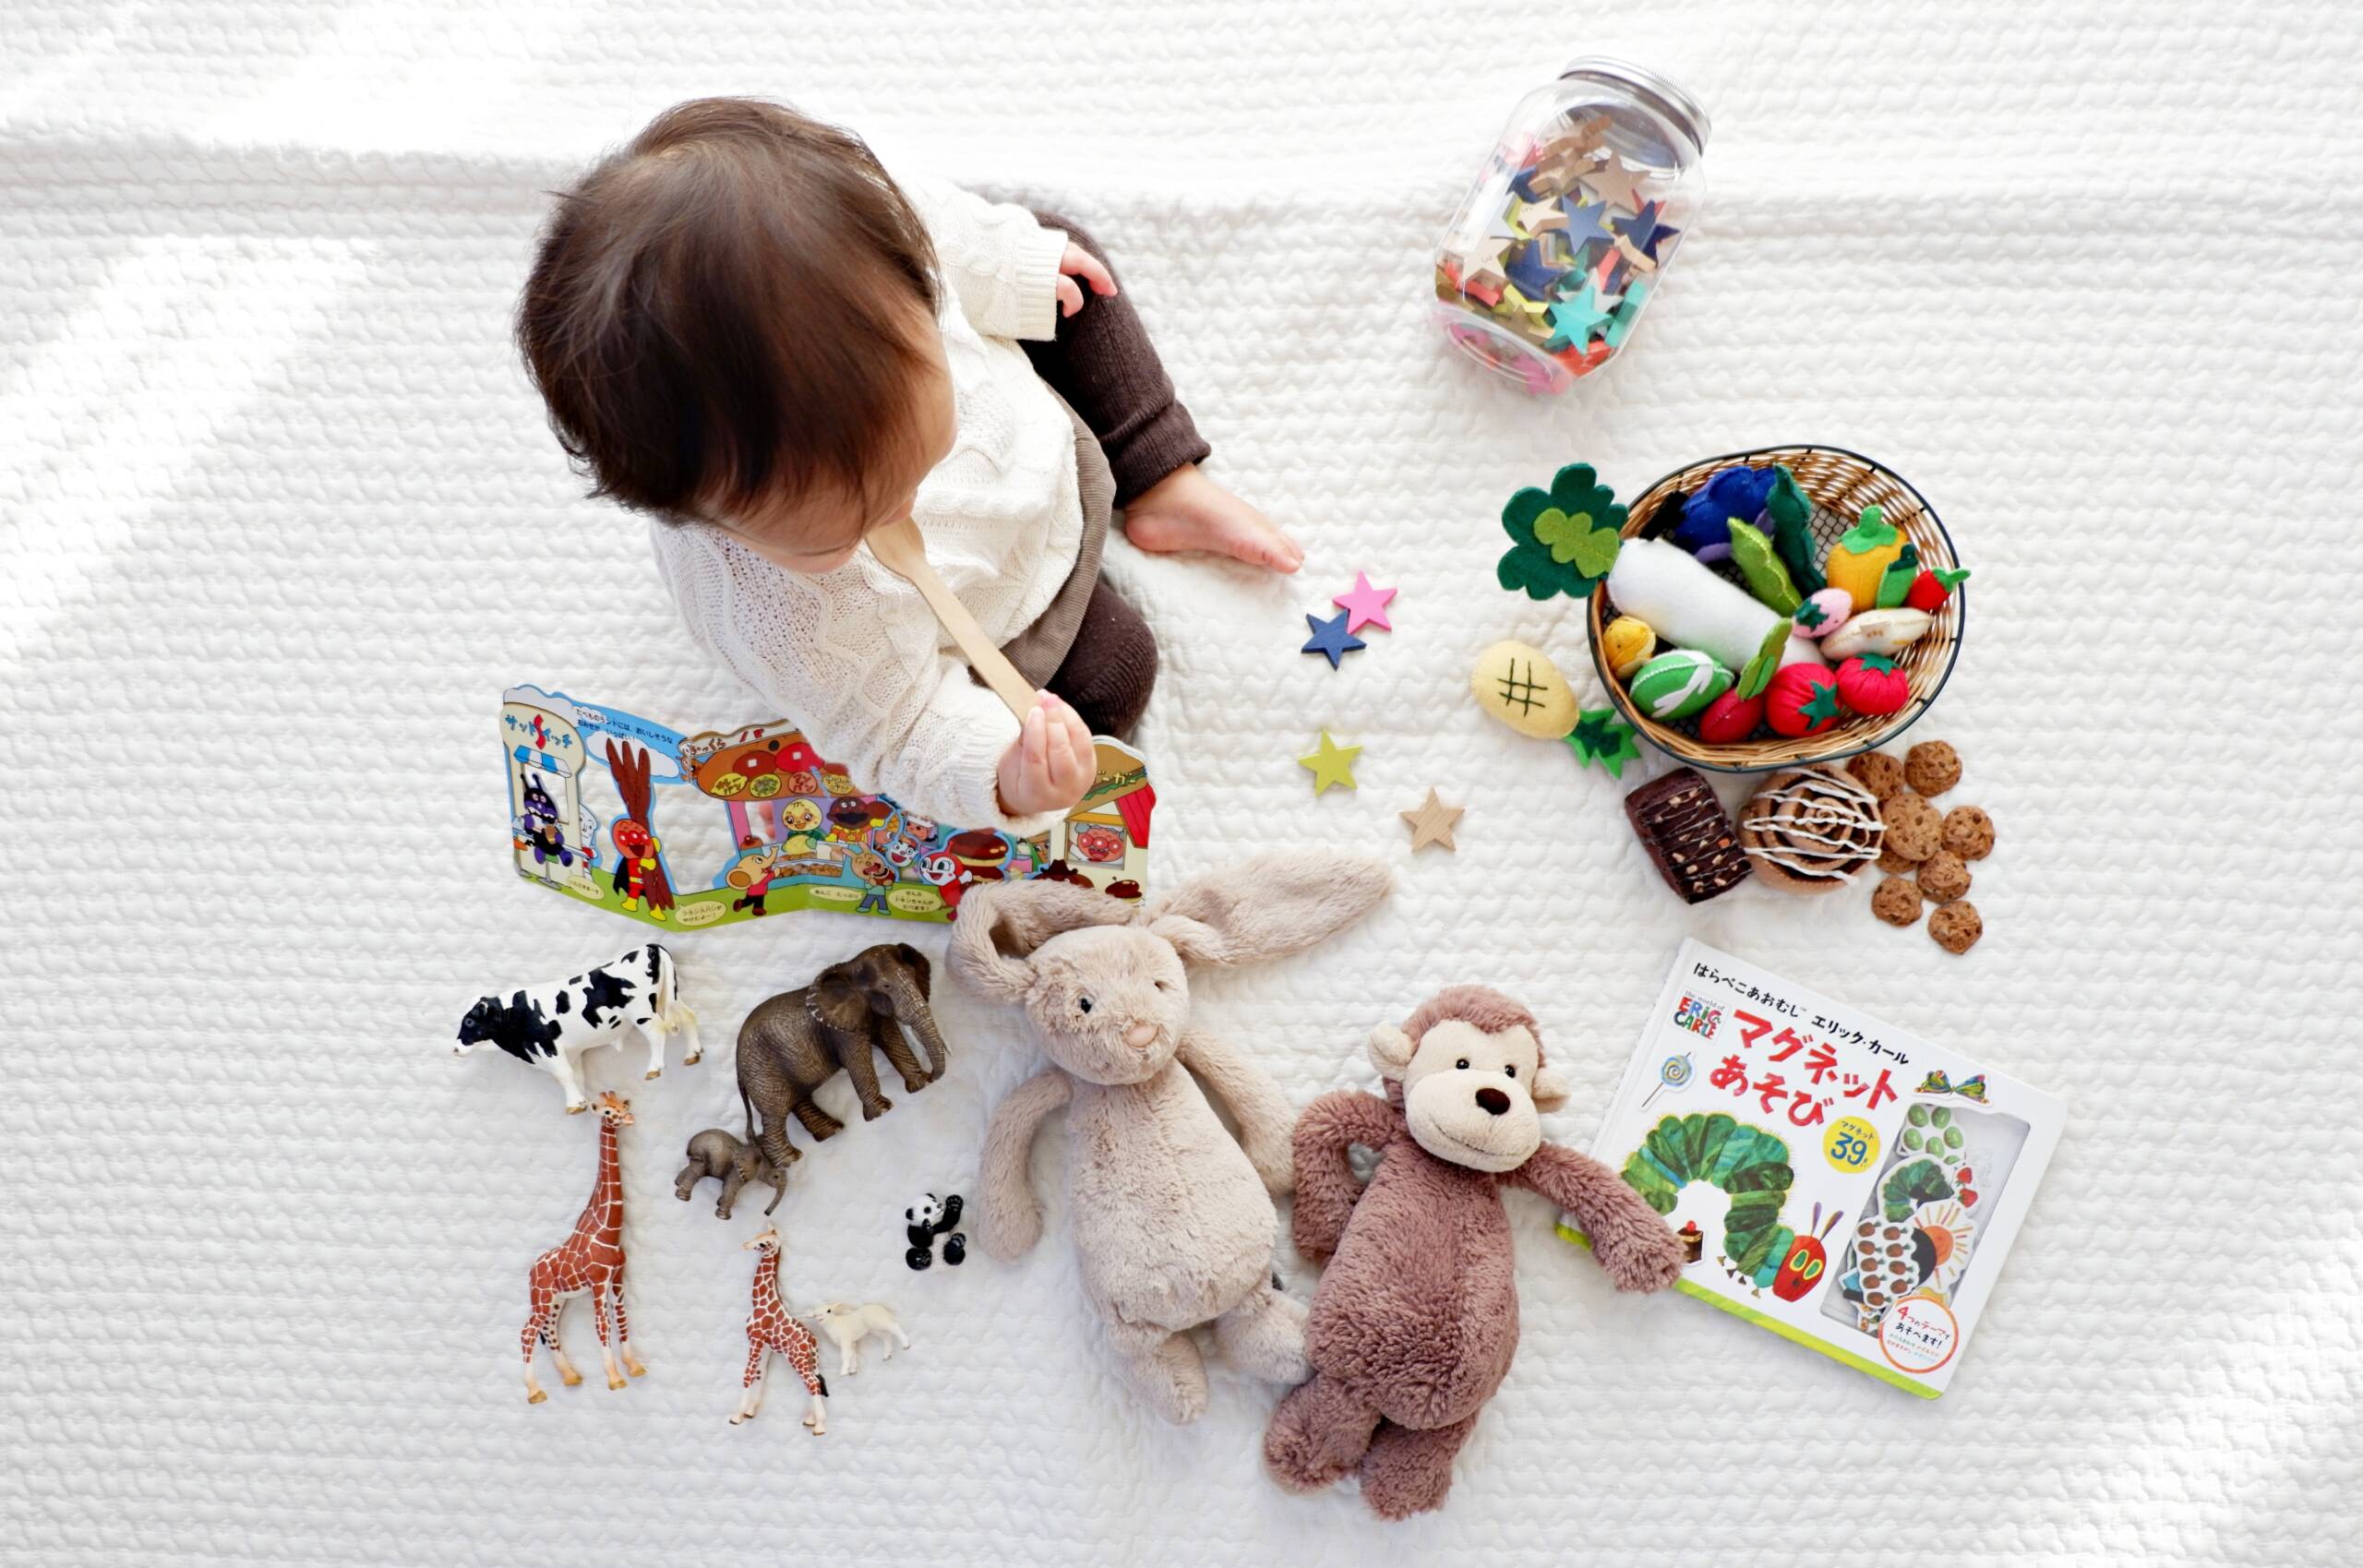 young child playing with toys